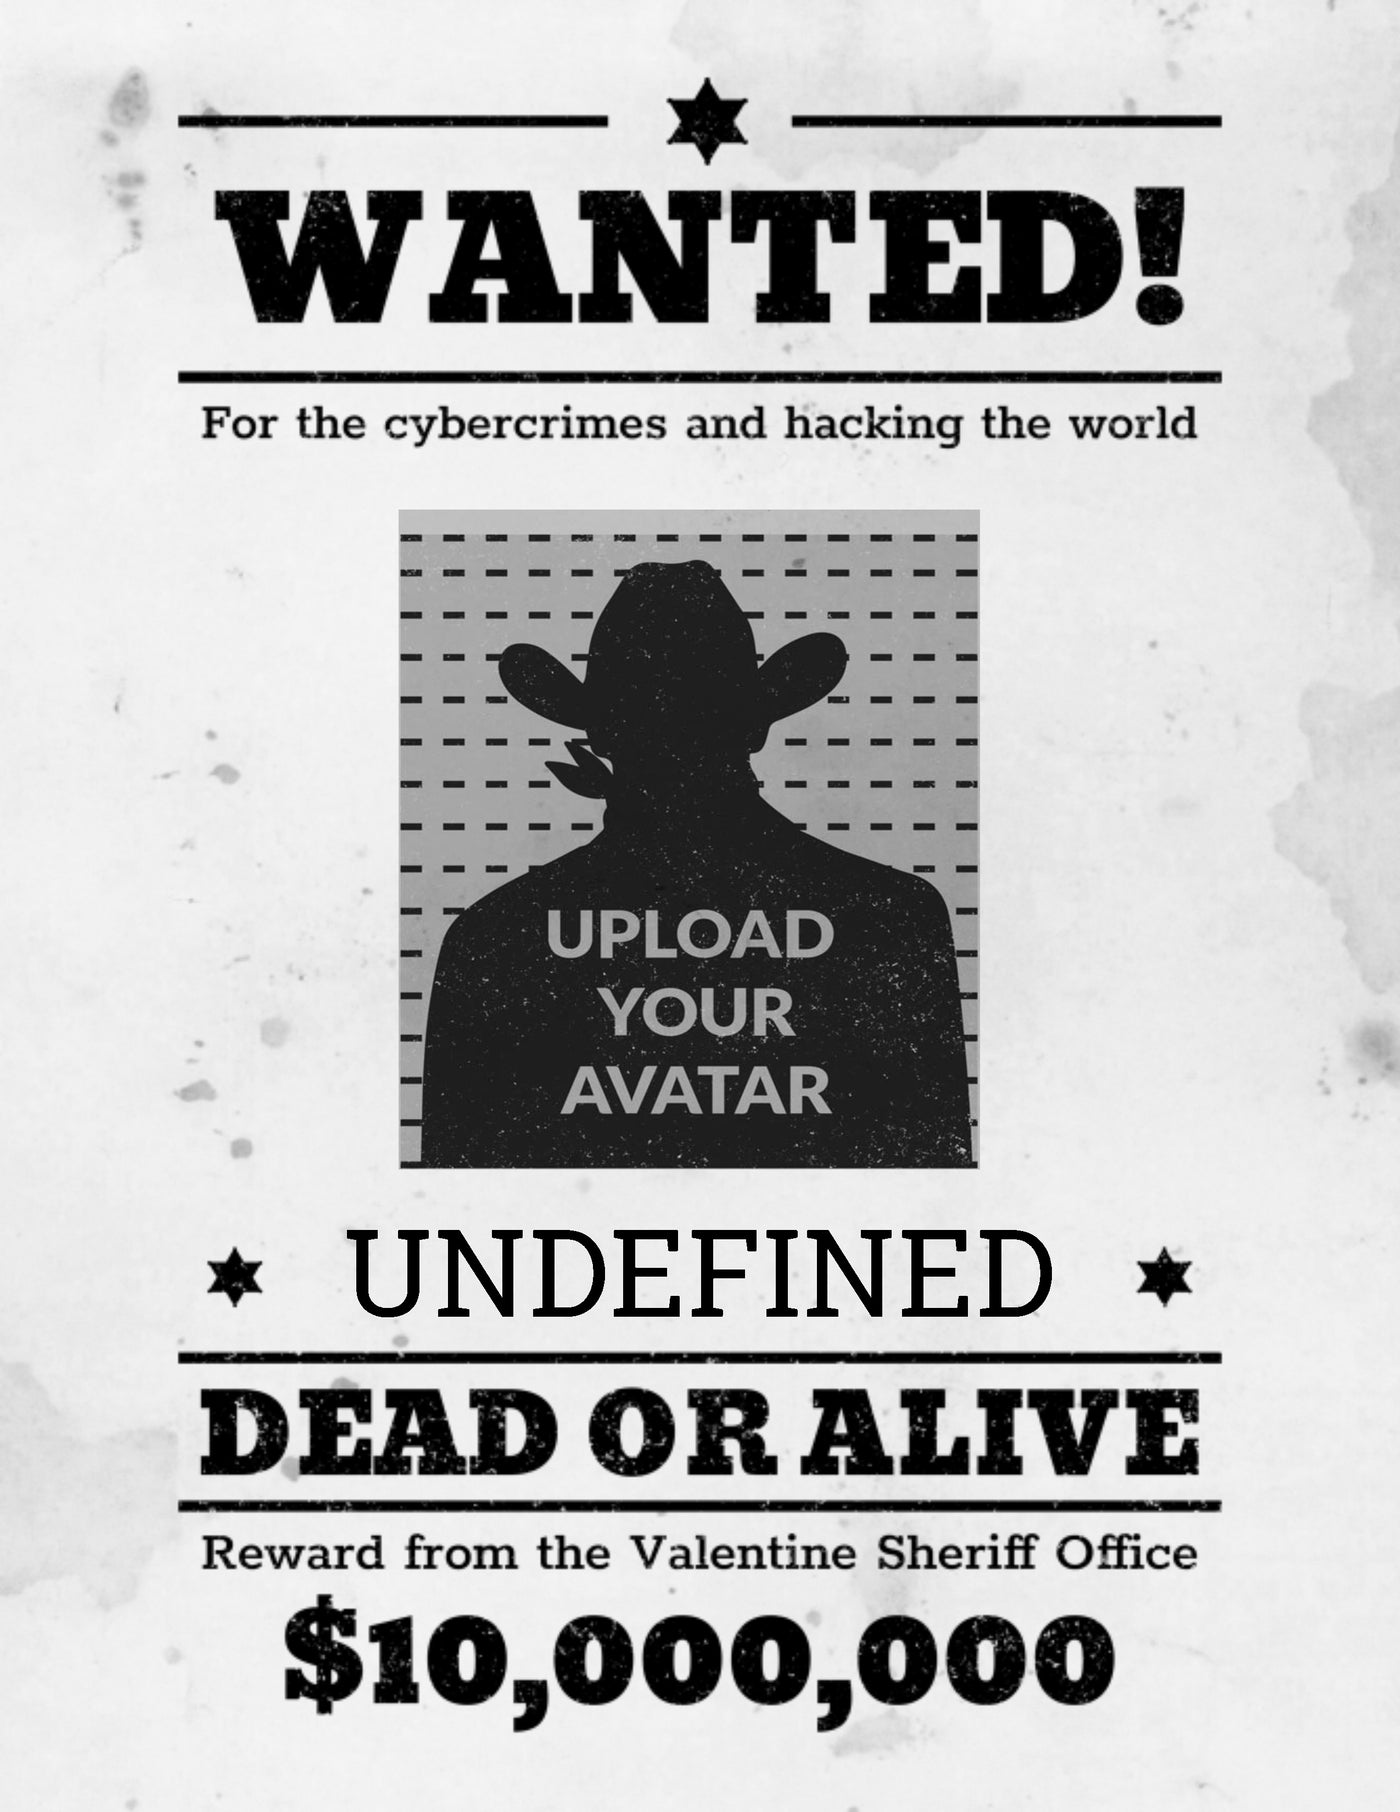 Wanted for the cybercrimes V2